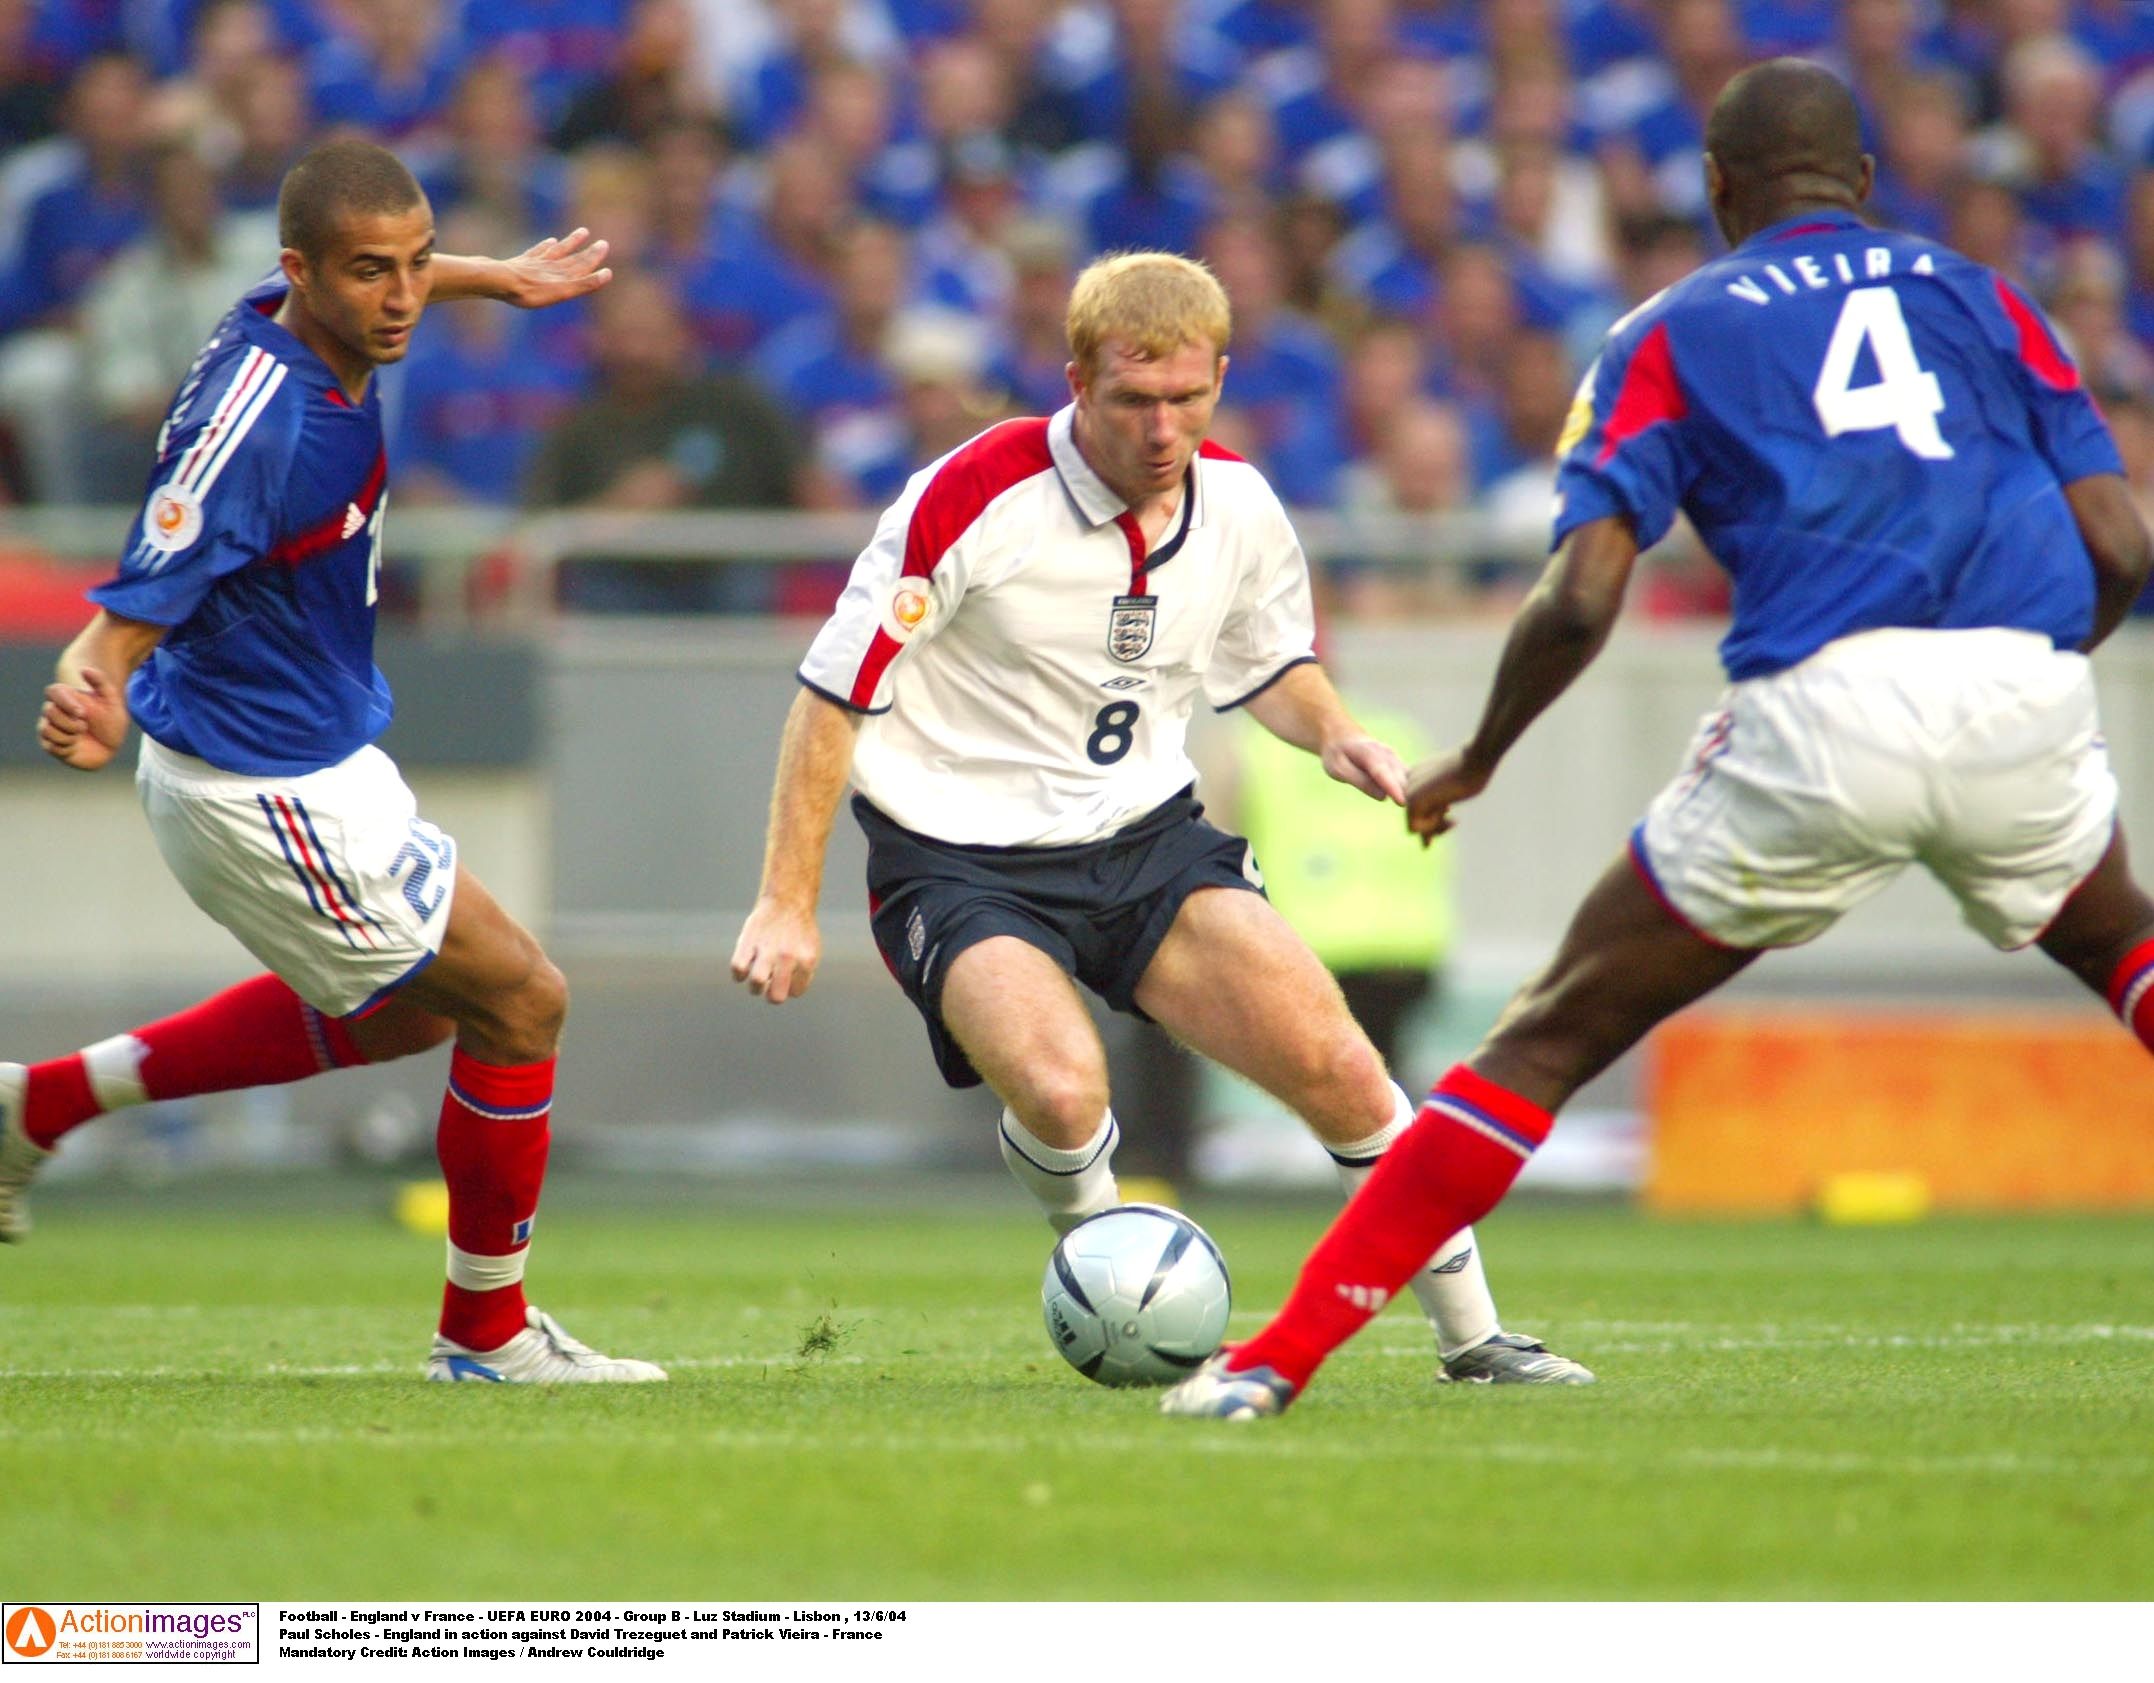 Paul Scholes shone for England against France at Euro 2004